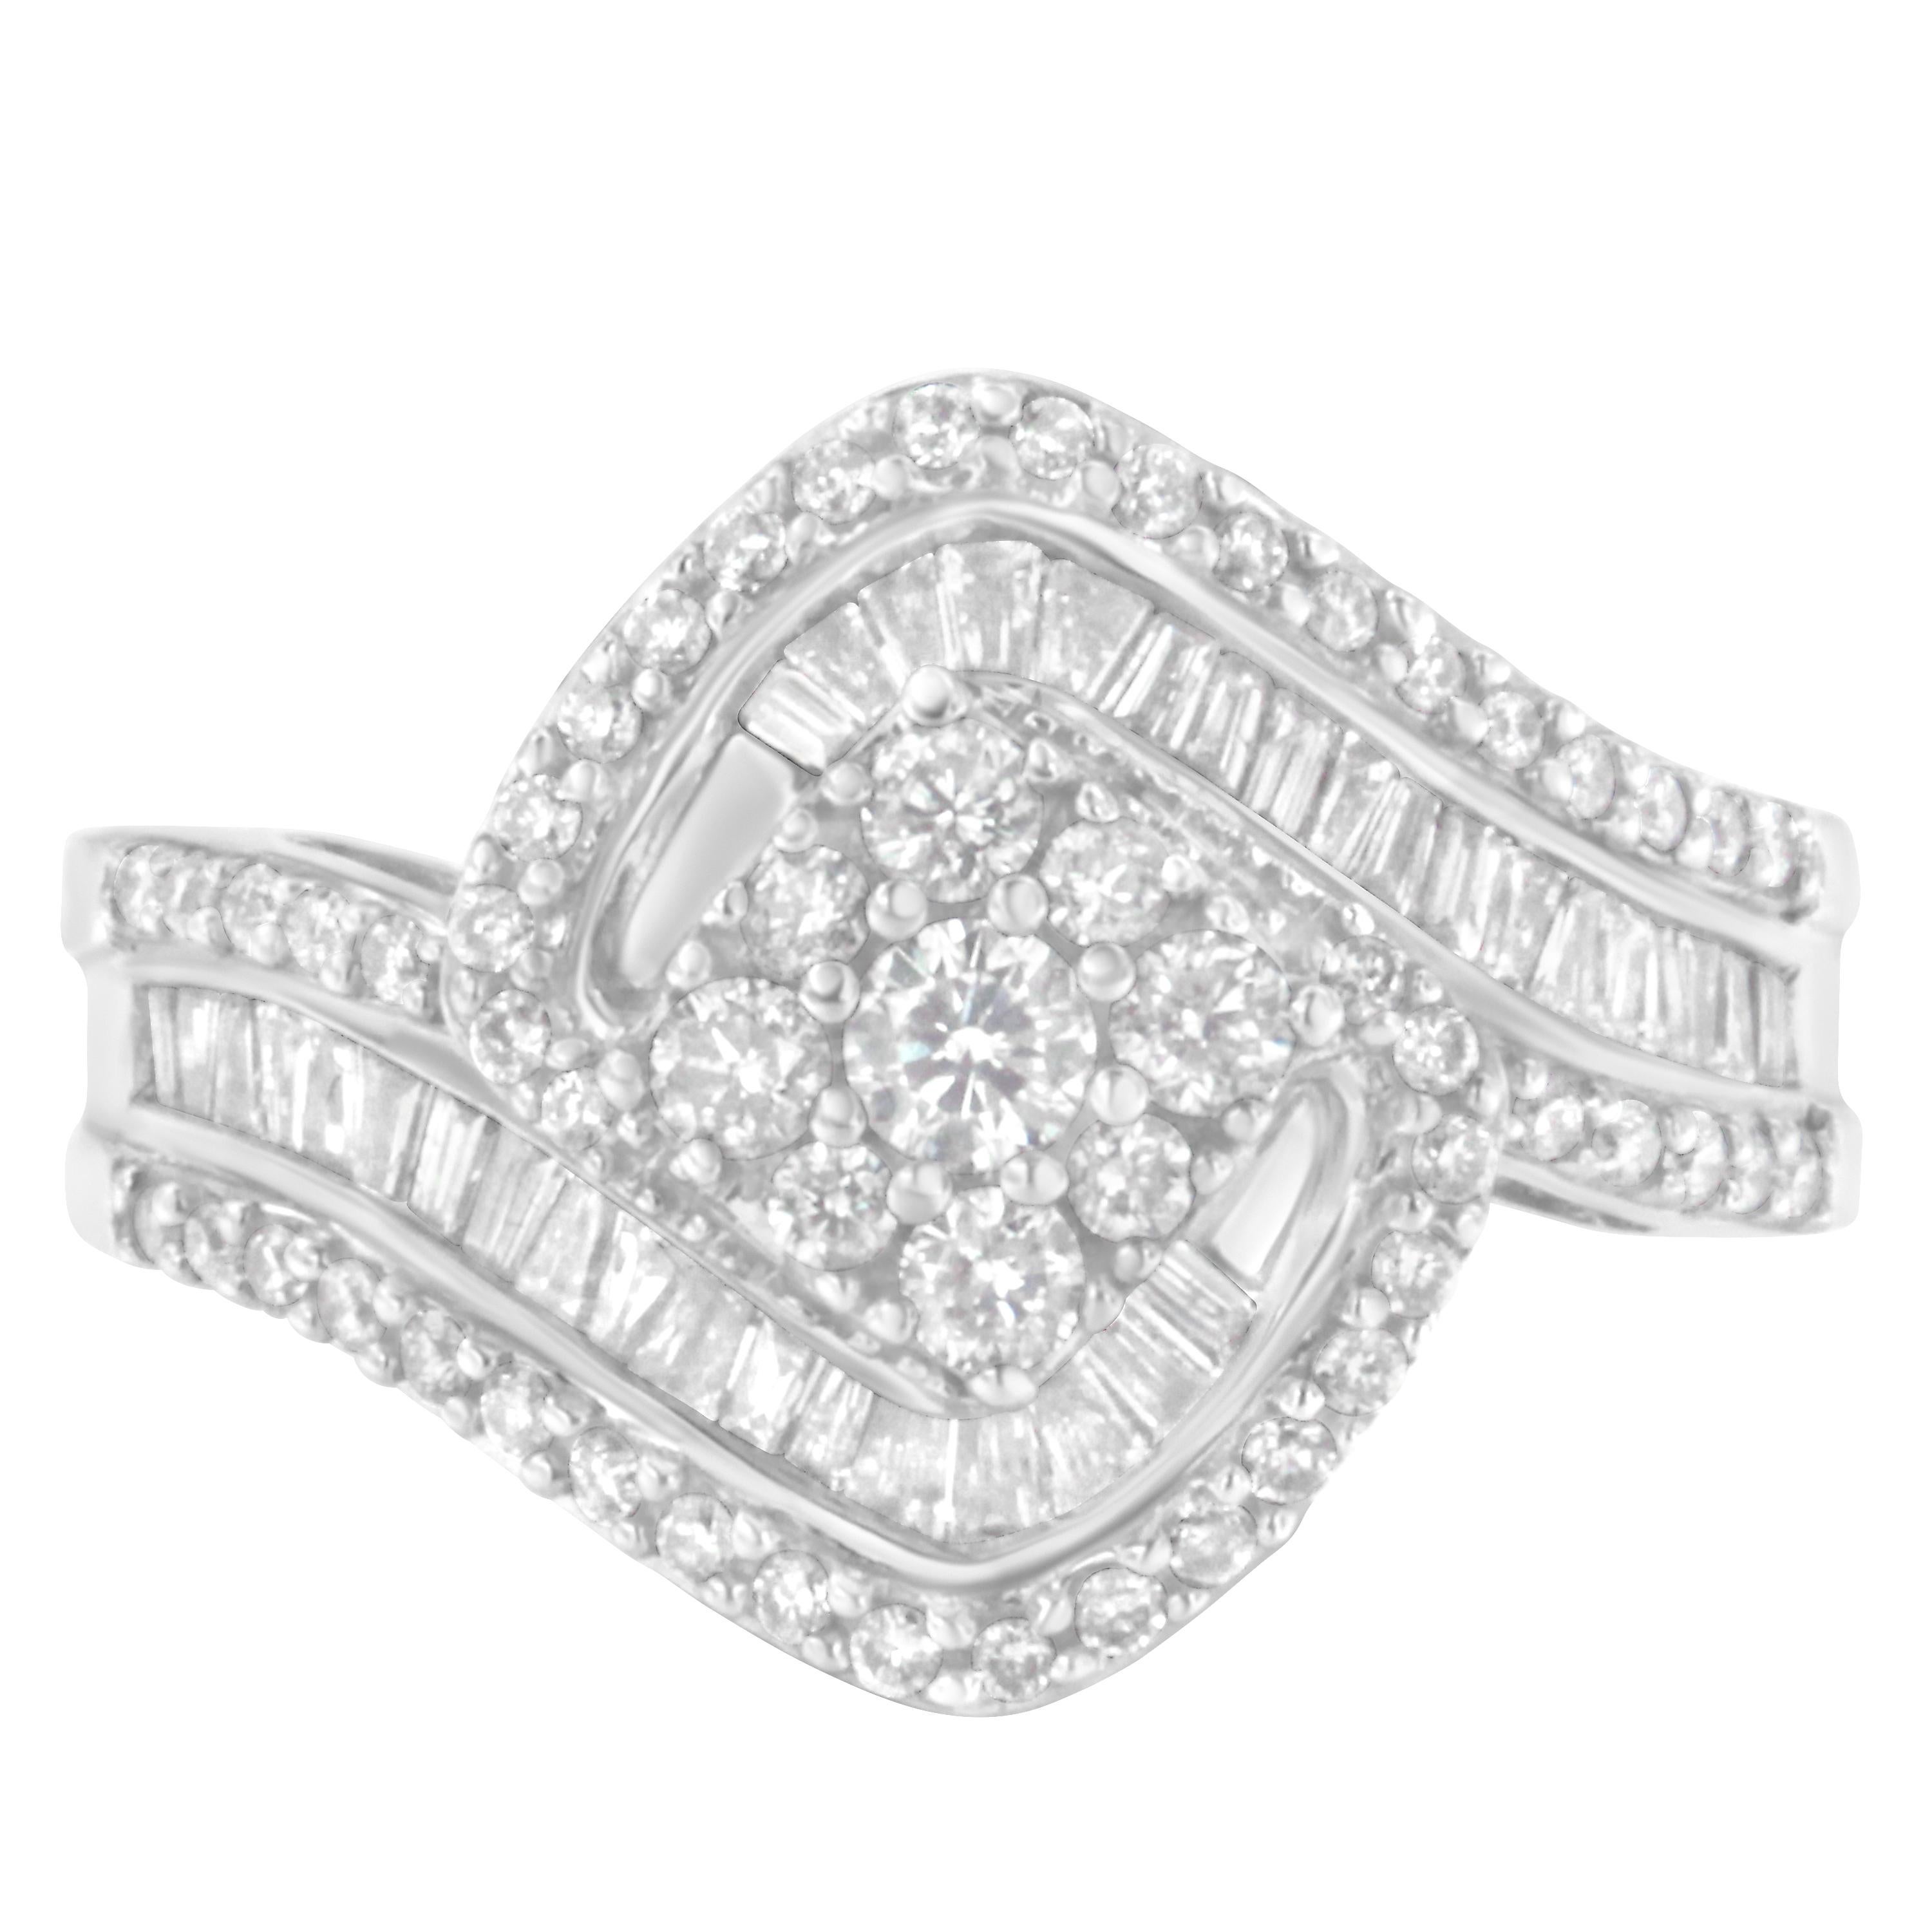 Make a classy and stylish style statement with this incredible diamond ring. Fashioned in 14k white gold, this fashion ring is framed in the prong setting with round and baguette-cut diamonds. Chiseled by top and skilled artists, this ring is a